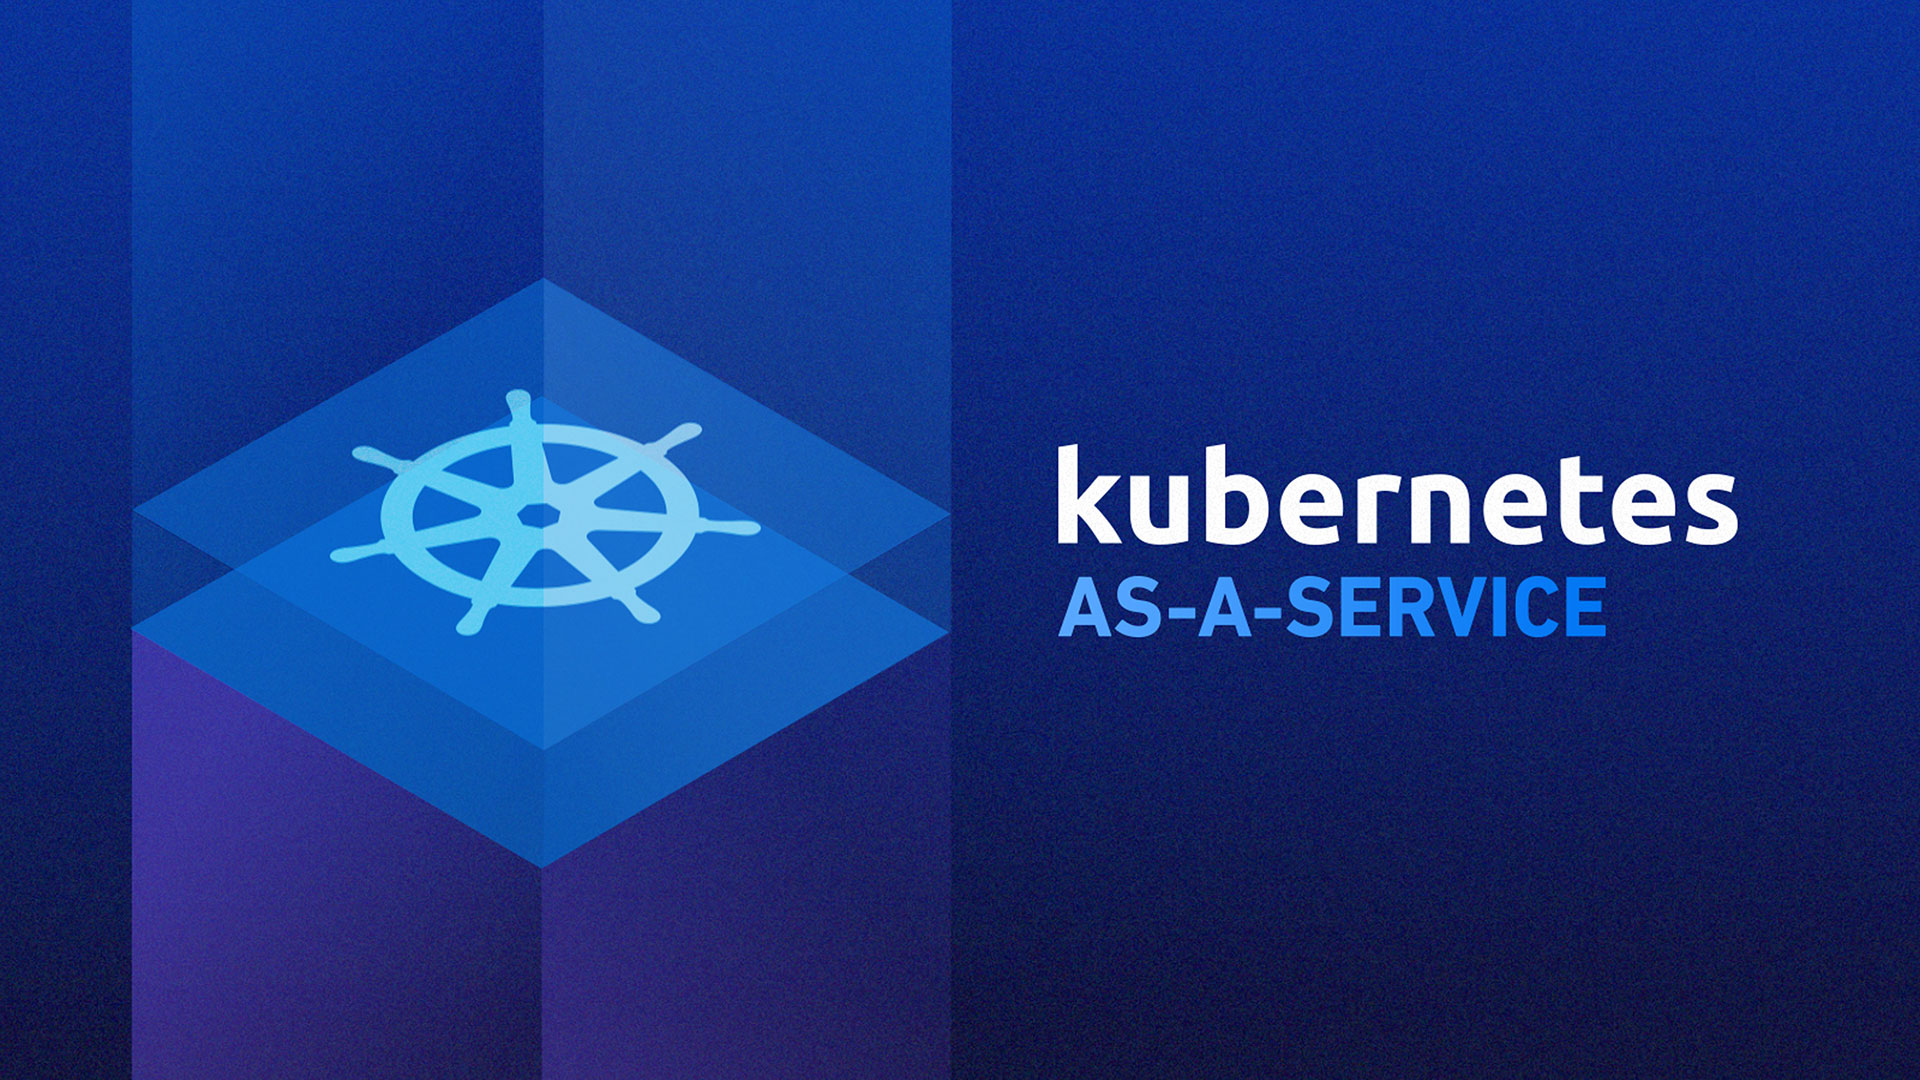 Deploying Kubernetes-as-a-Service on DC/OS